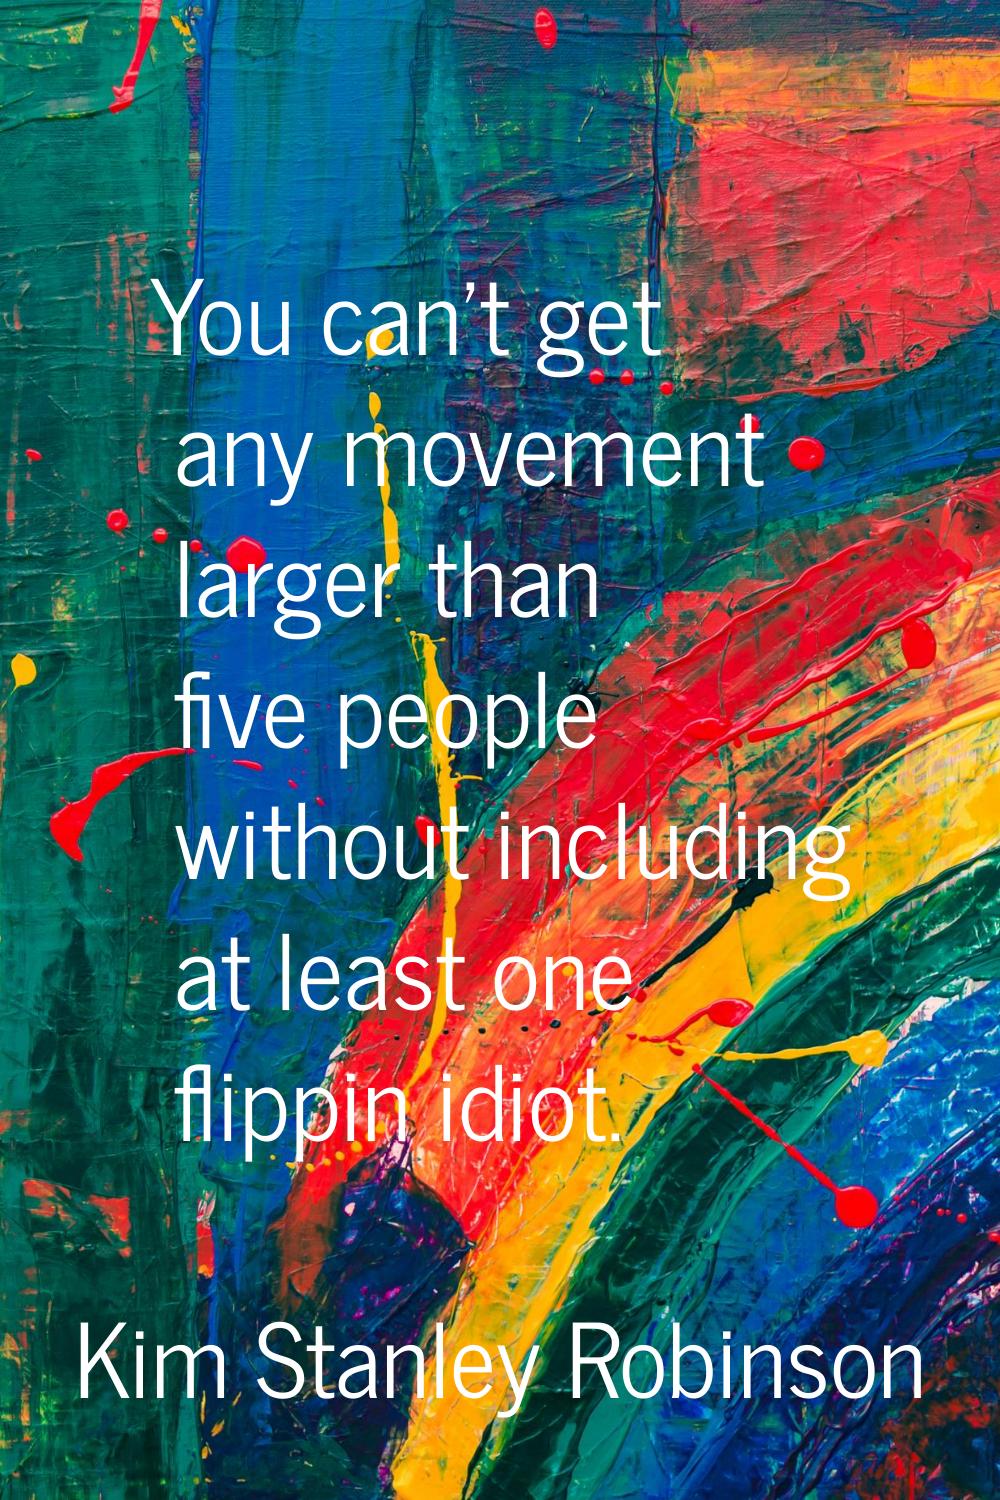 You can't get any movement larger than five people without including at least one flippin idiot.